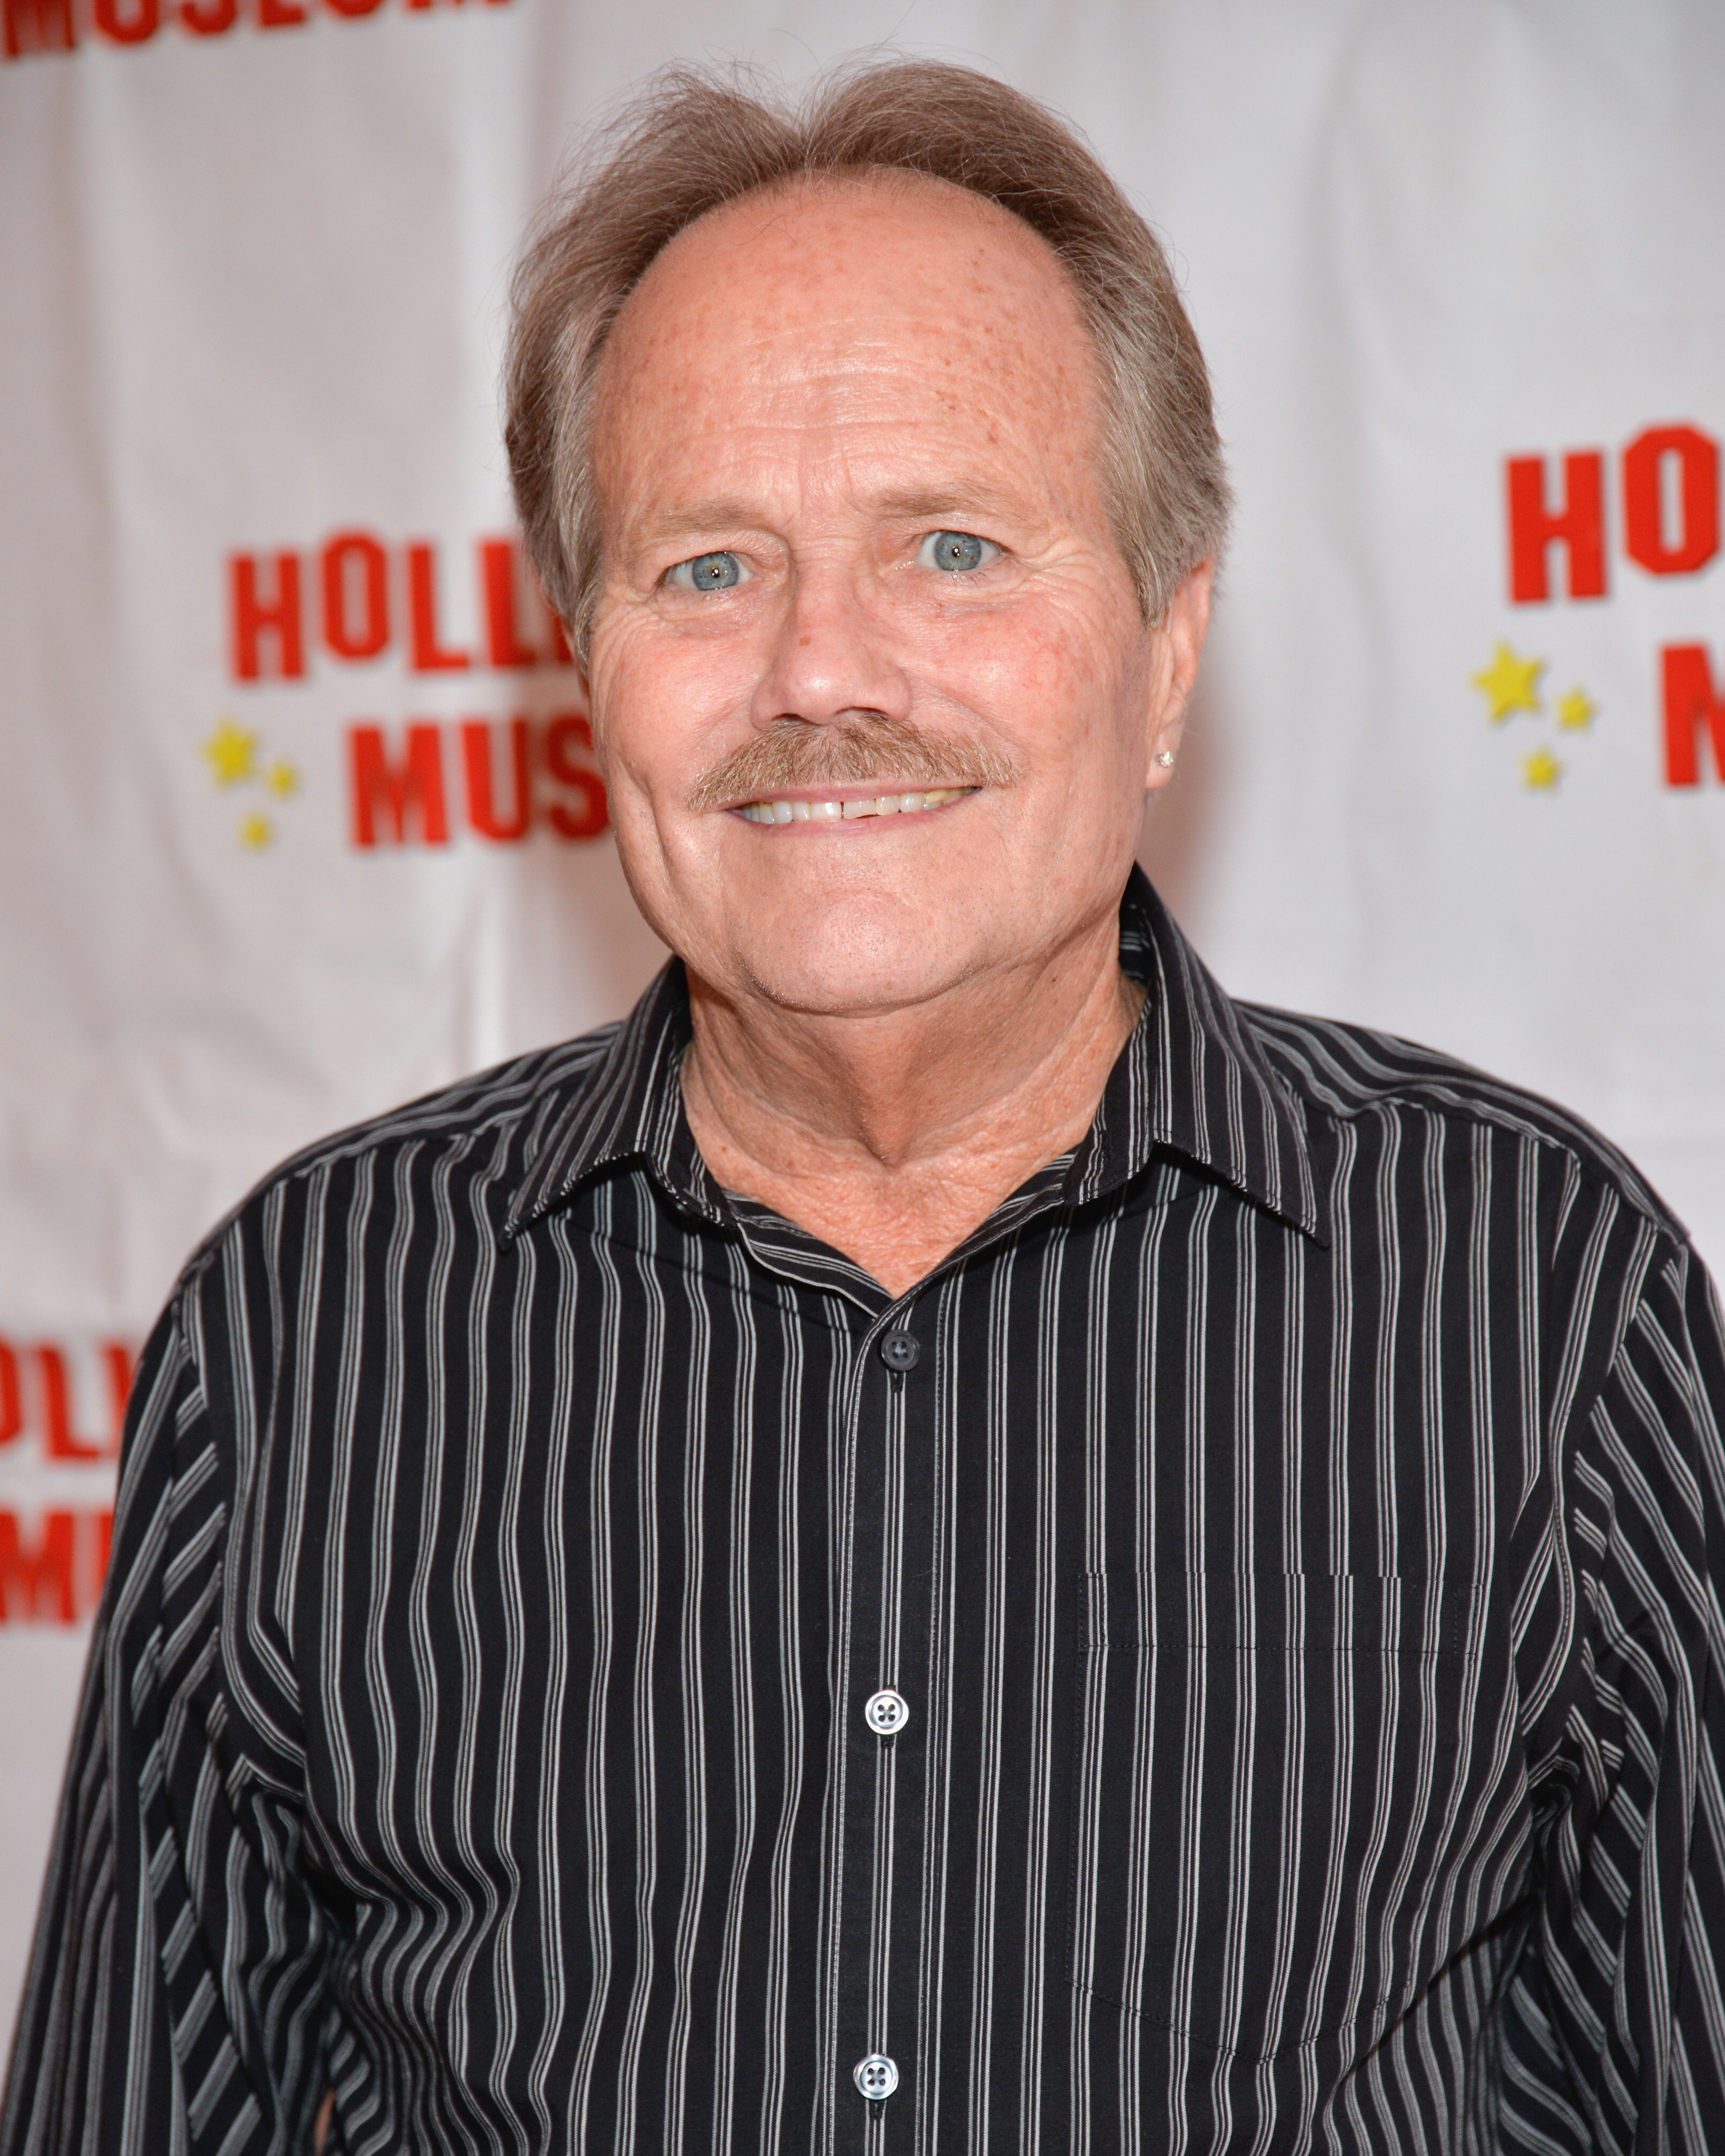 Jon Provost at a preview of "Child Stars - Then And Now" exhibit at The Hollywood Museum on August 18, 2016, in Hollywood, California | Source: Getty Images